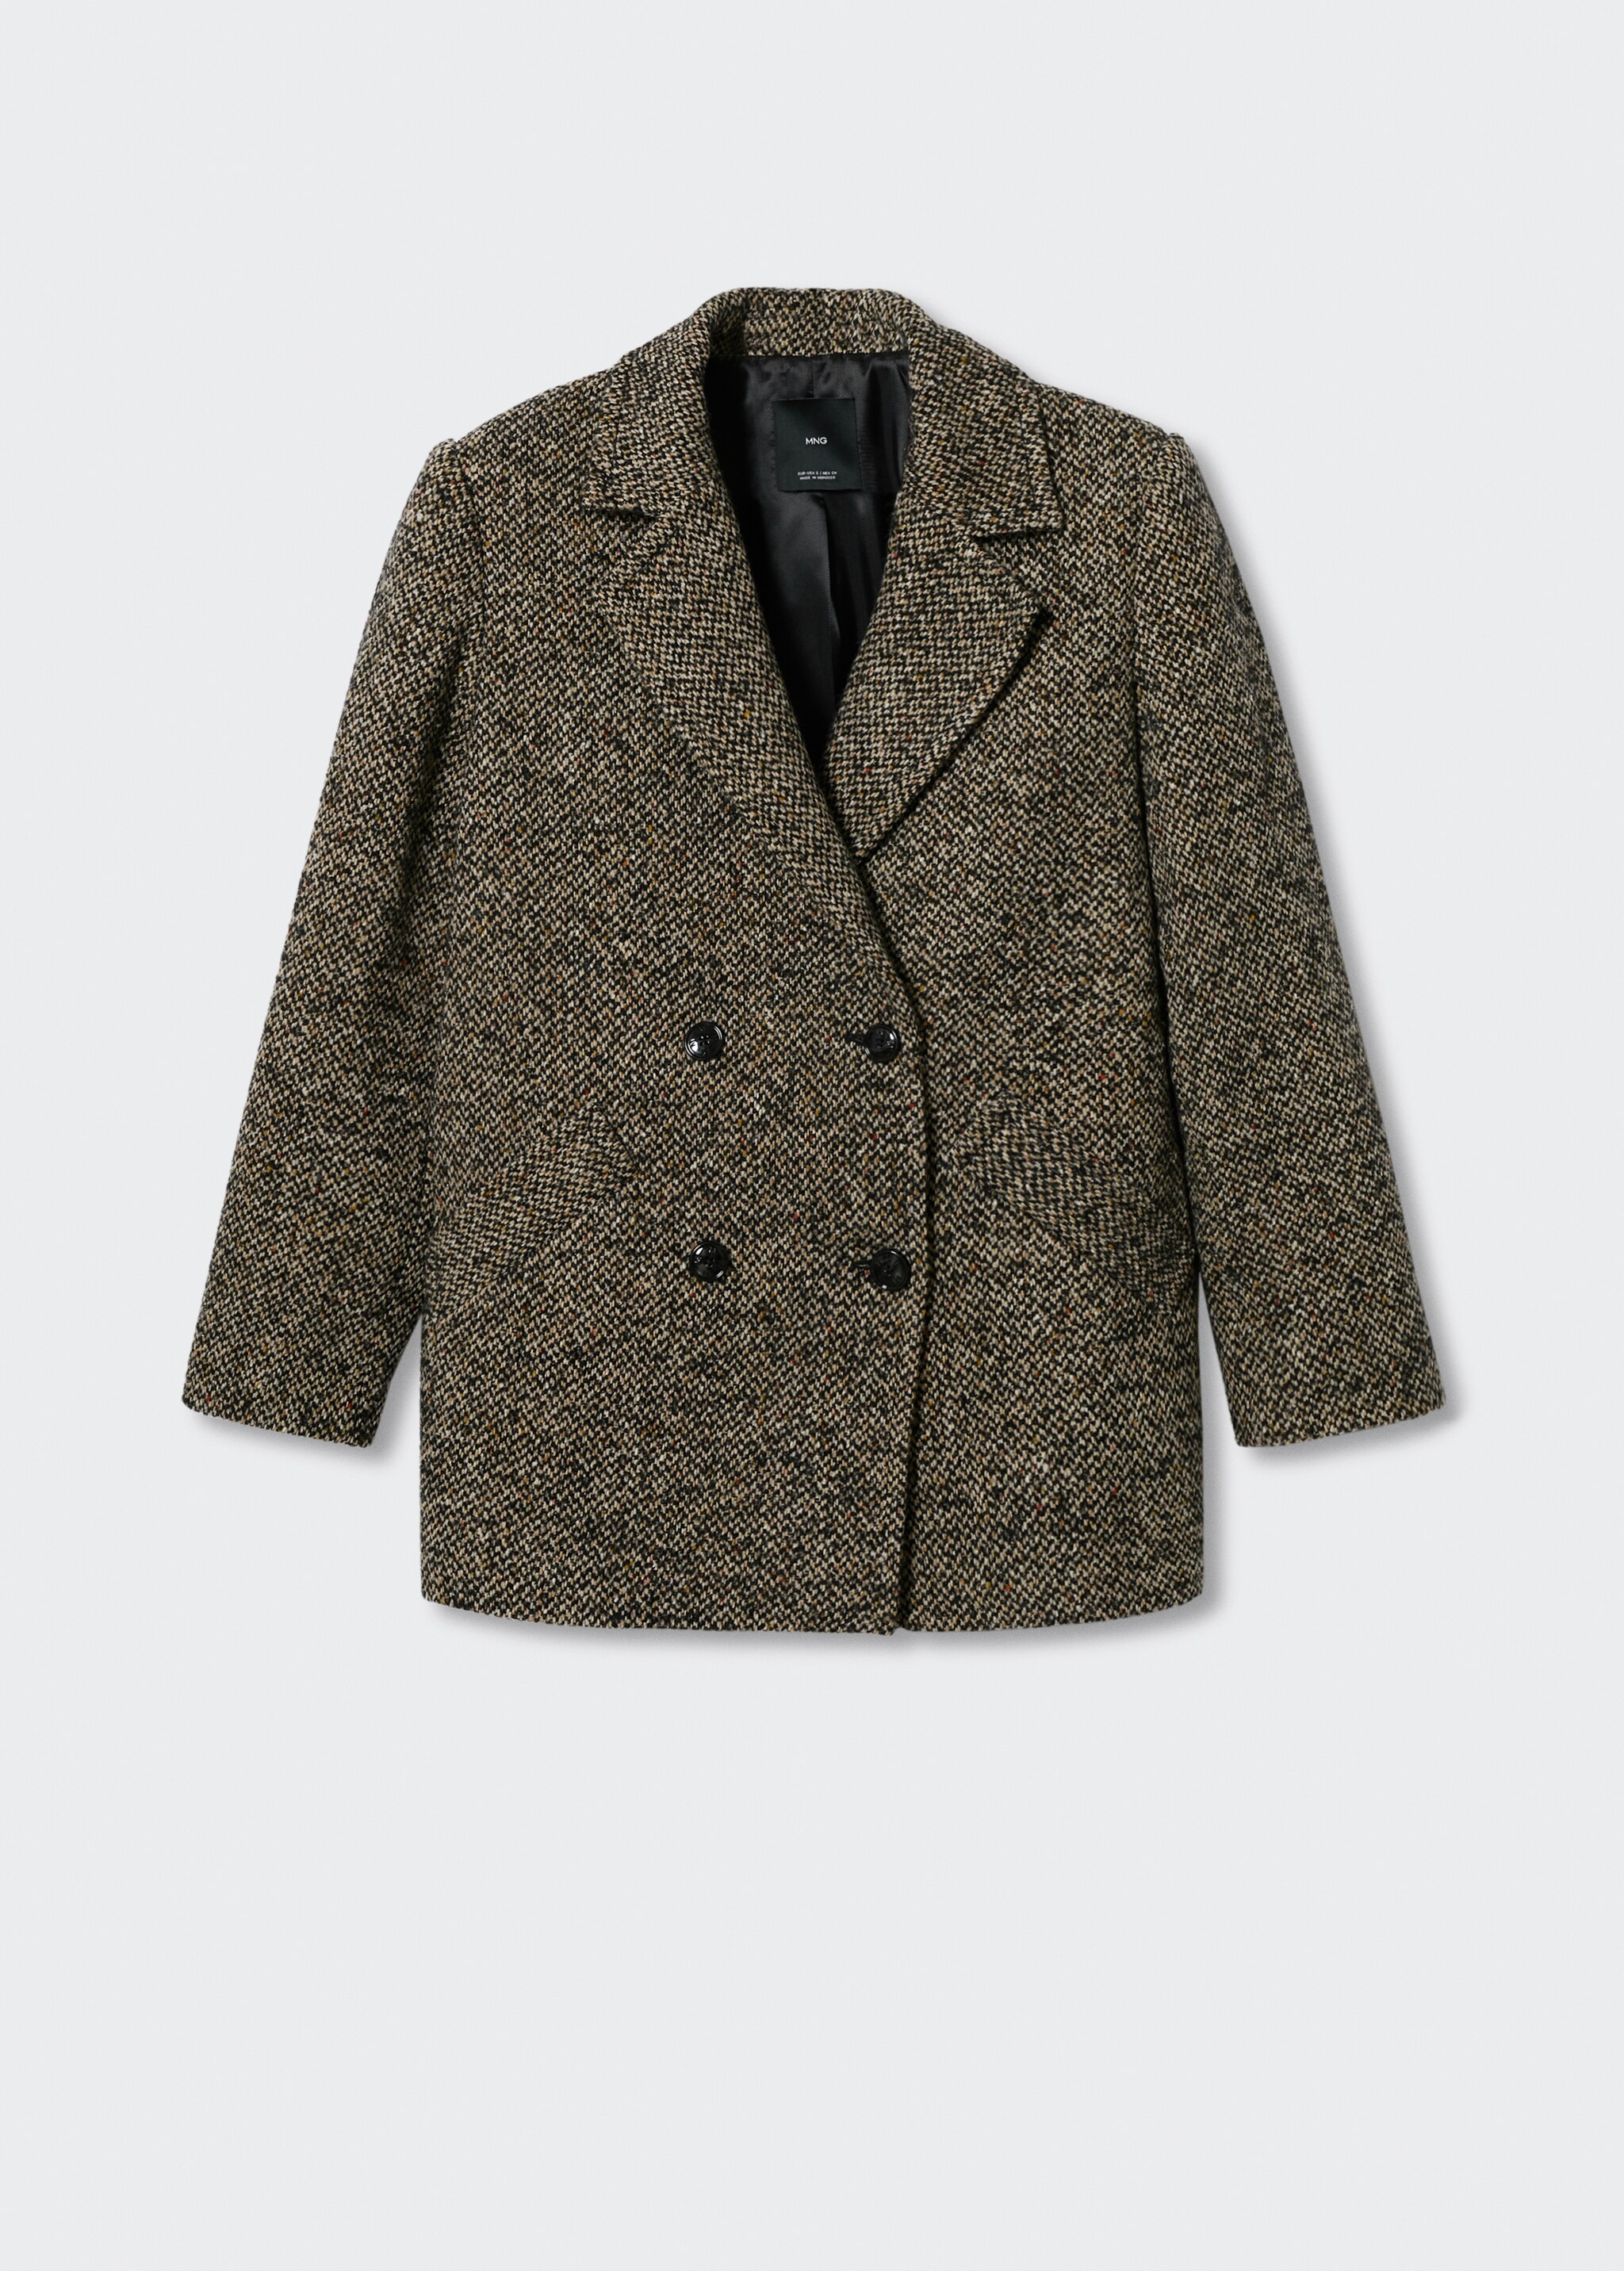 Textured flecked wool coat - Article without model